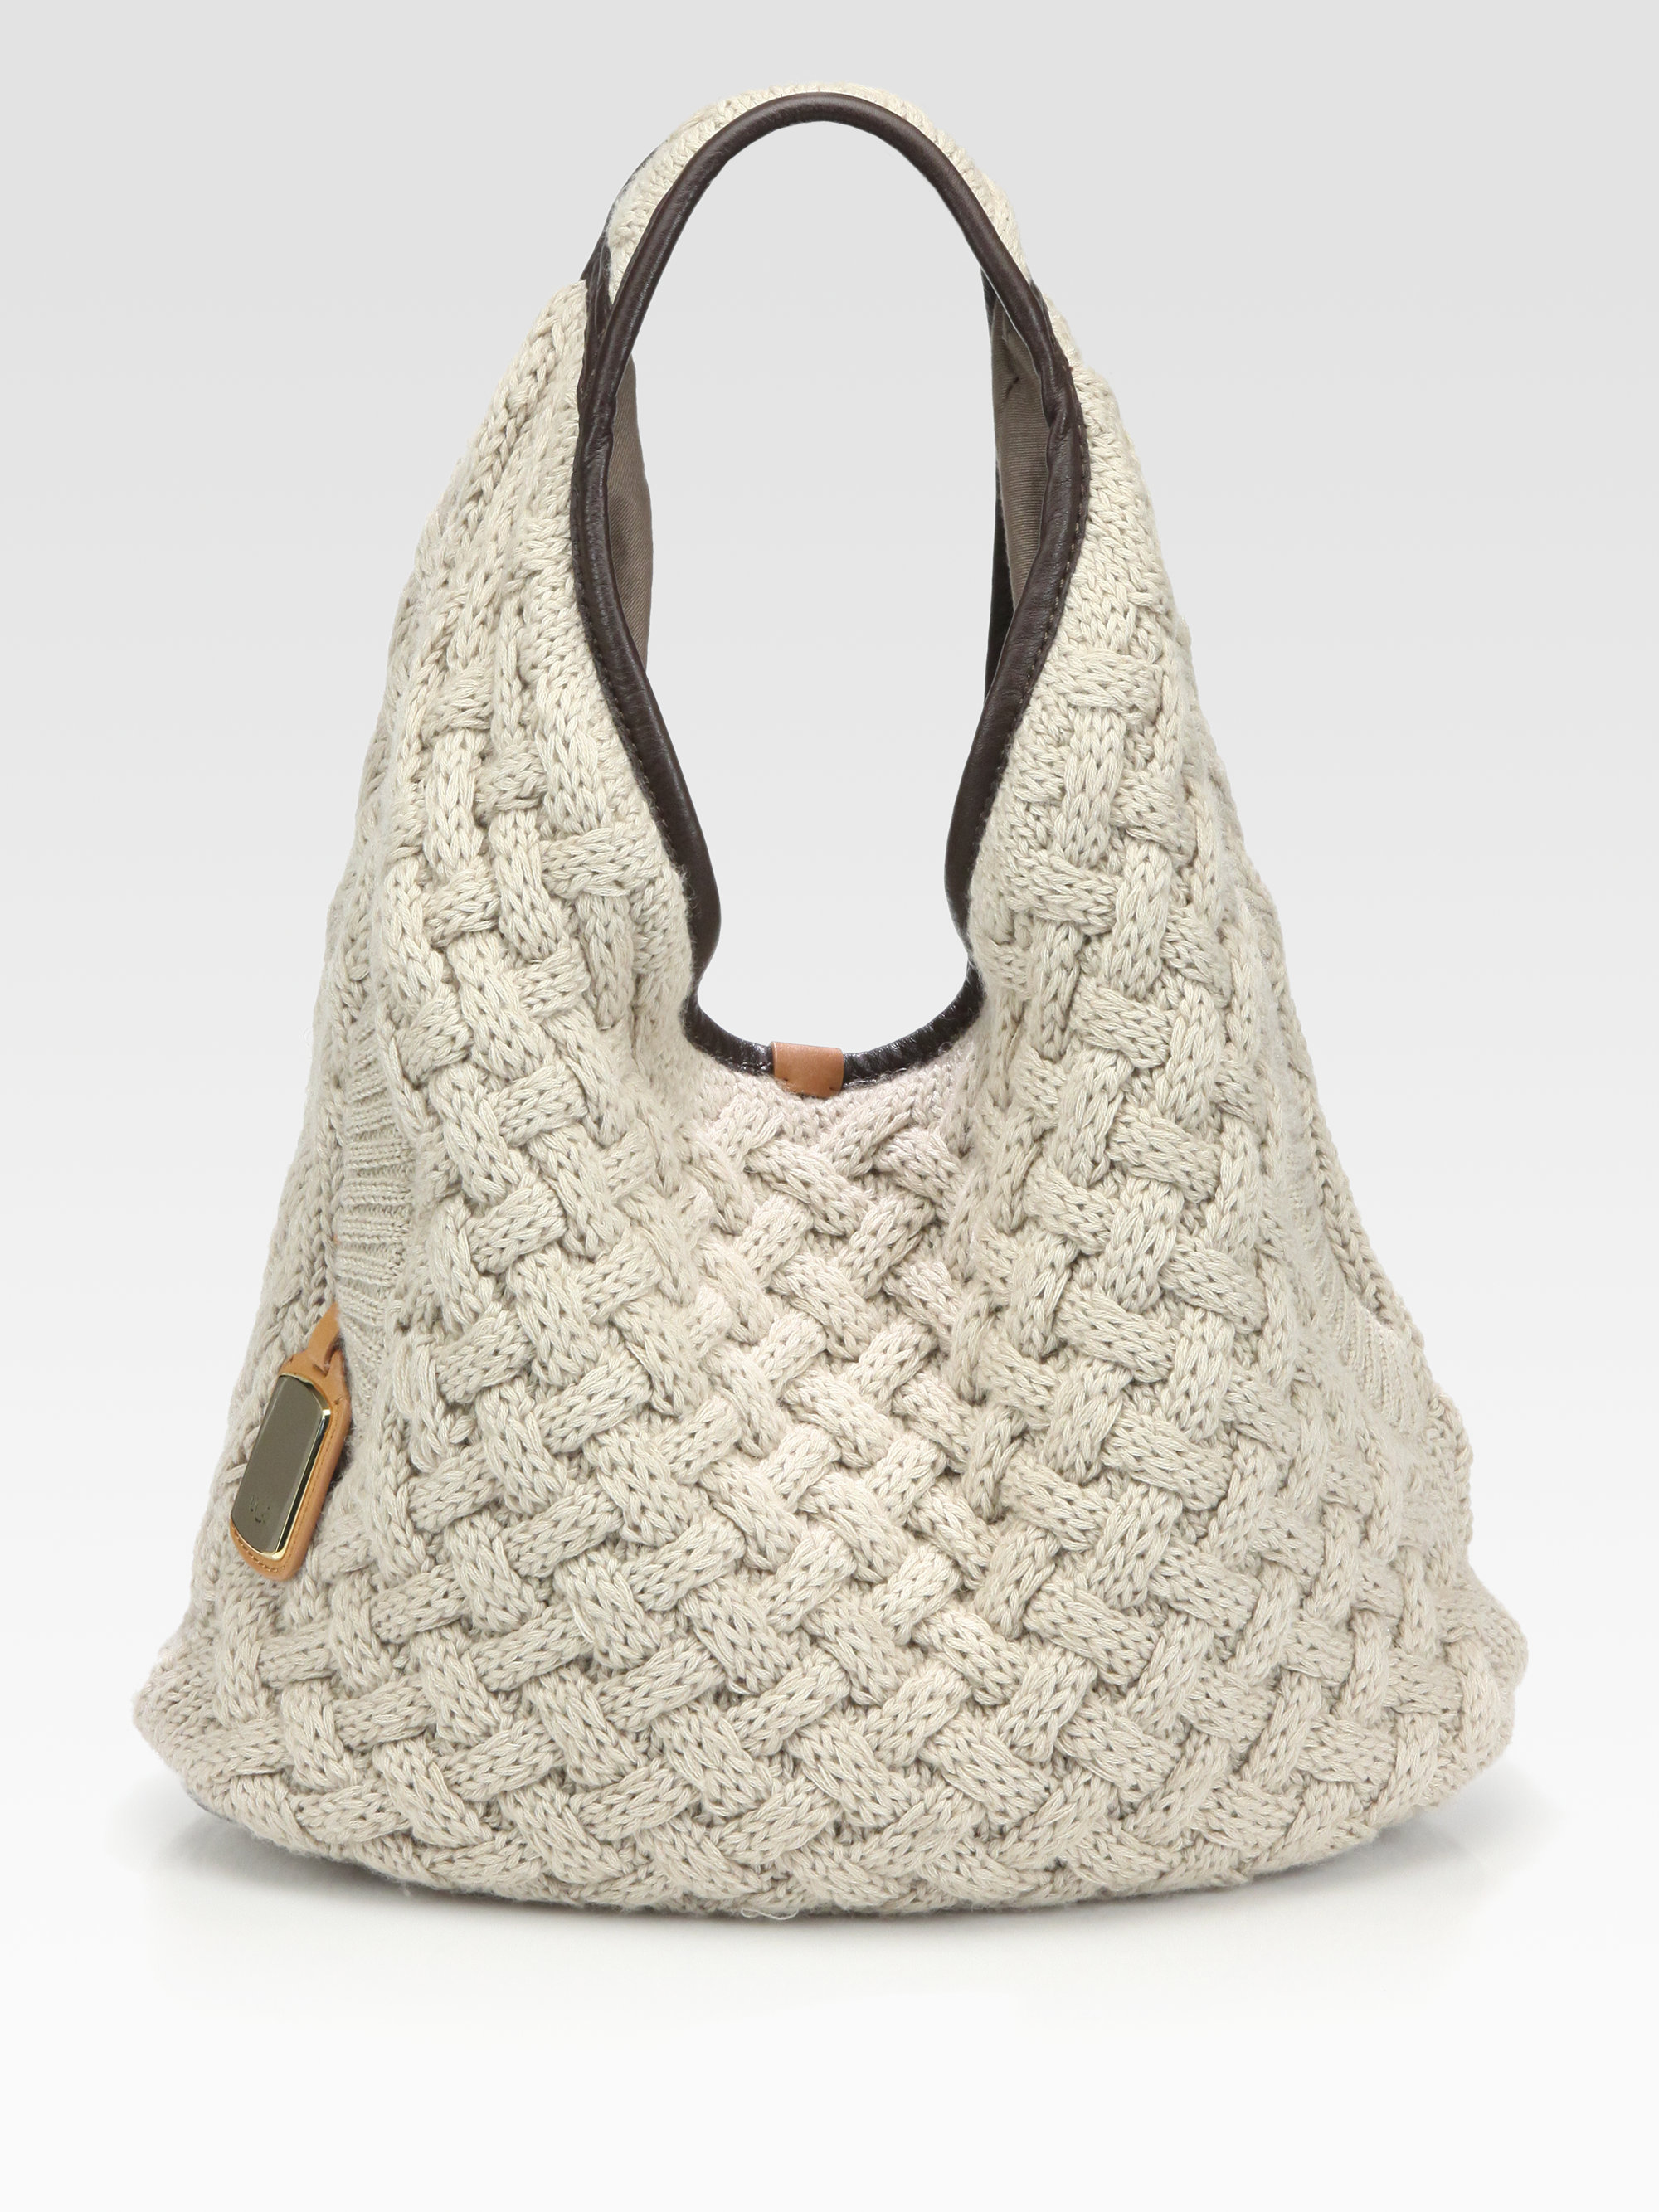 UGG Knit Wool Hobo Bag in Natural | Lyst